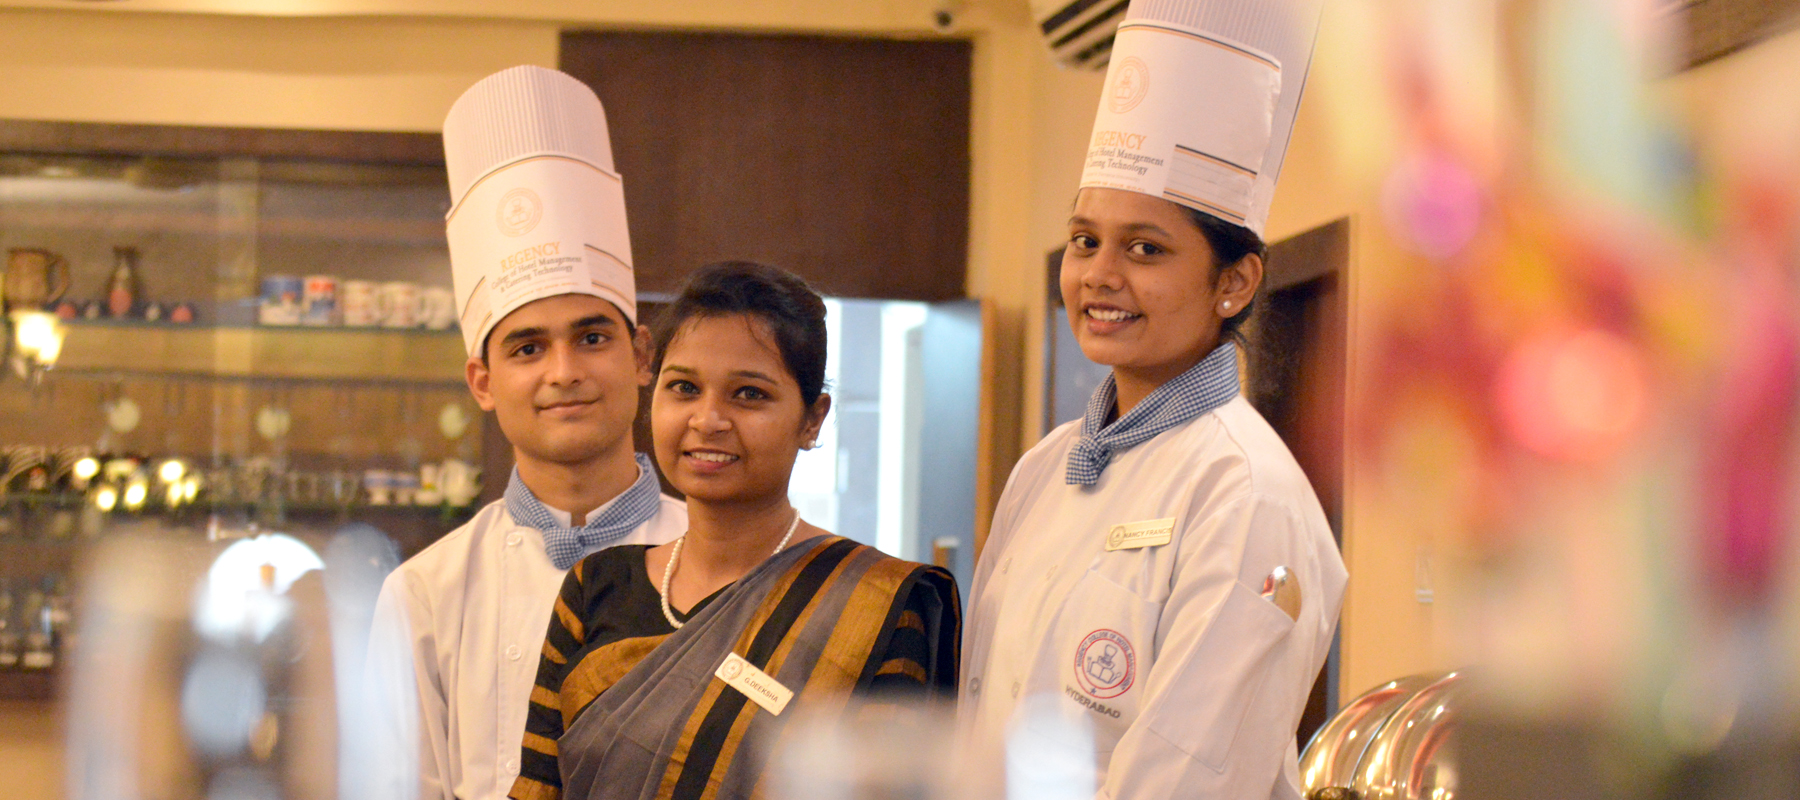 hotel management courses after 12th in hyderabad